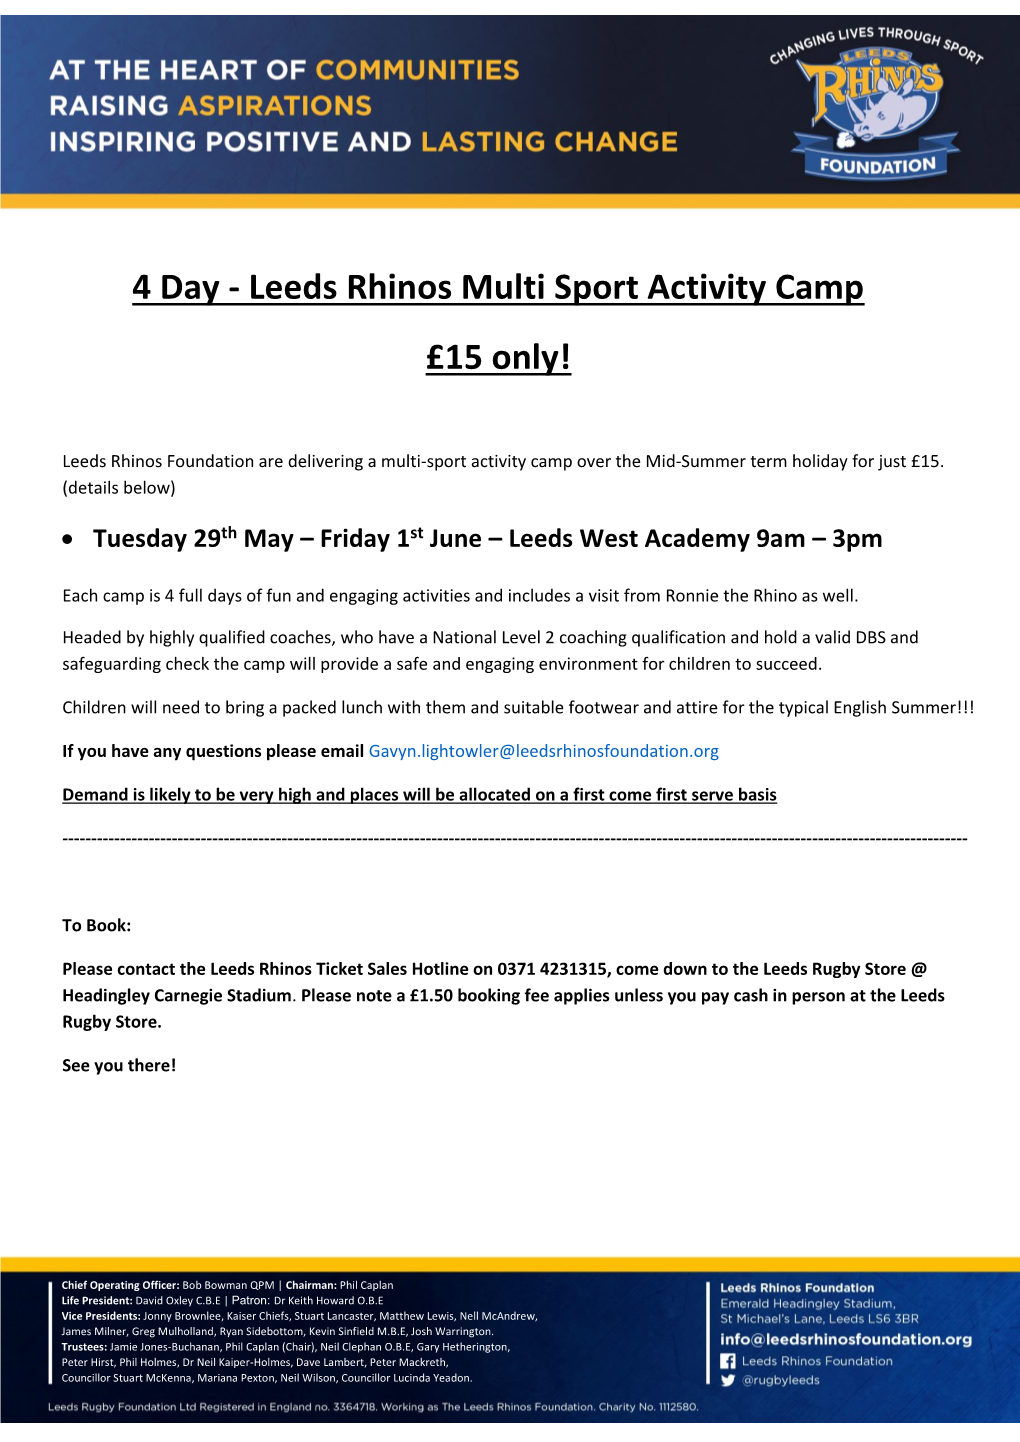 4 Day - Leeds Rhinos Multi Sport Activity Camp £15 Only!